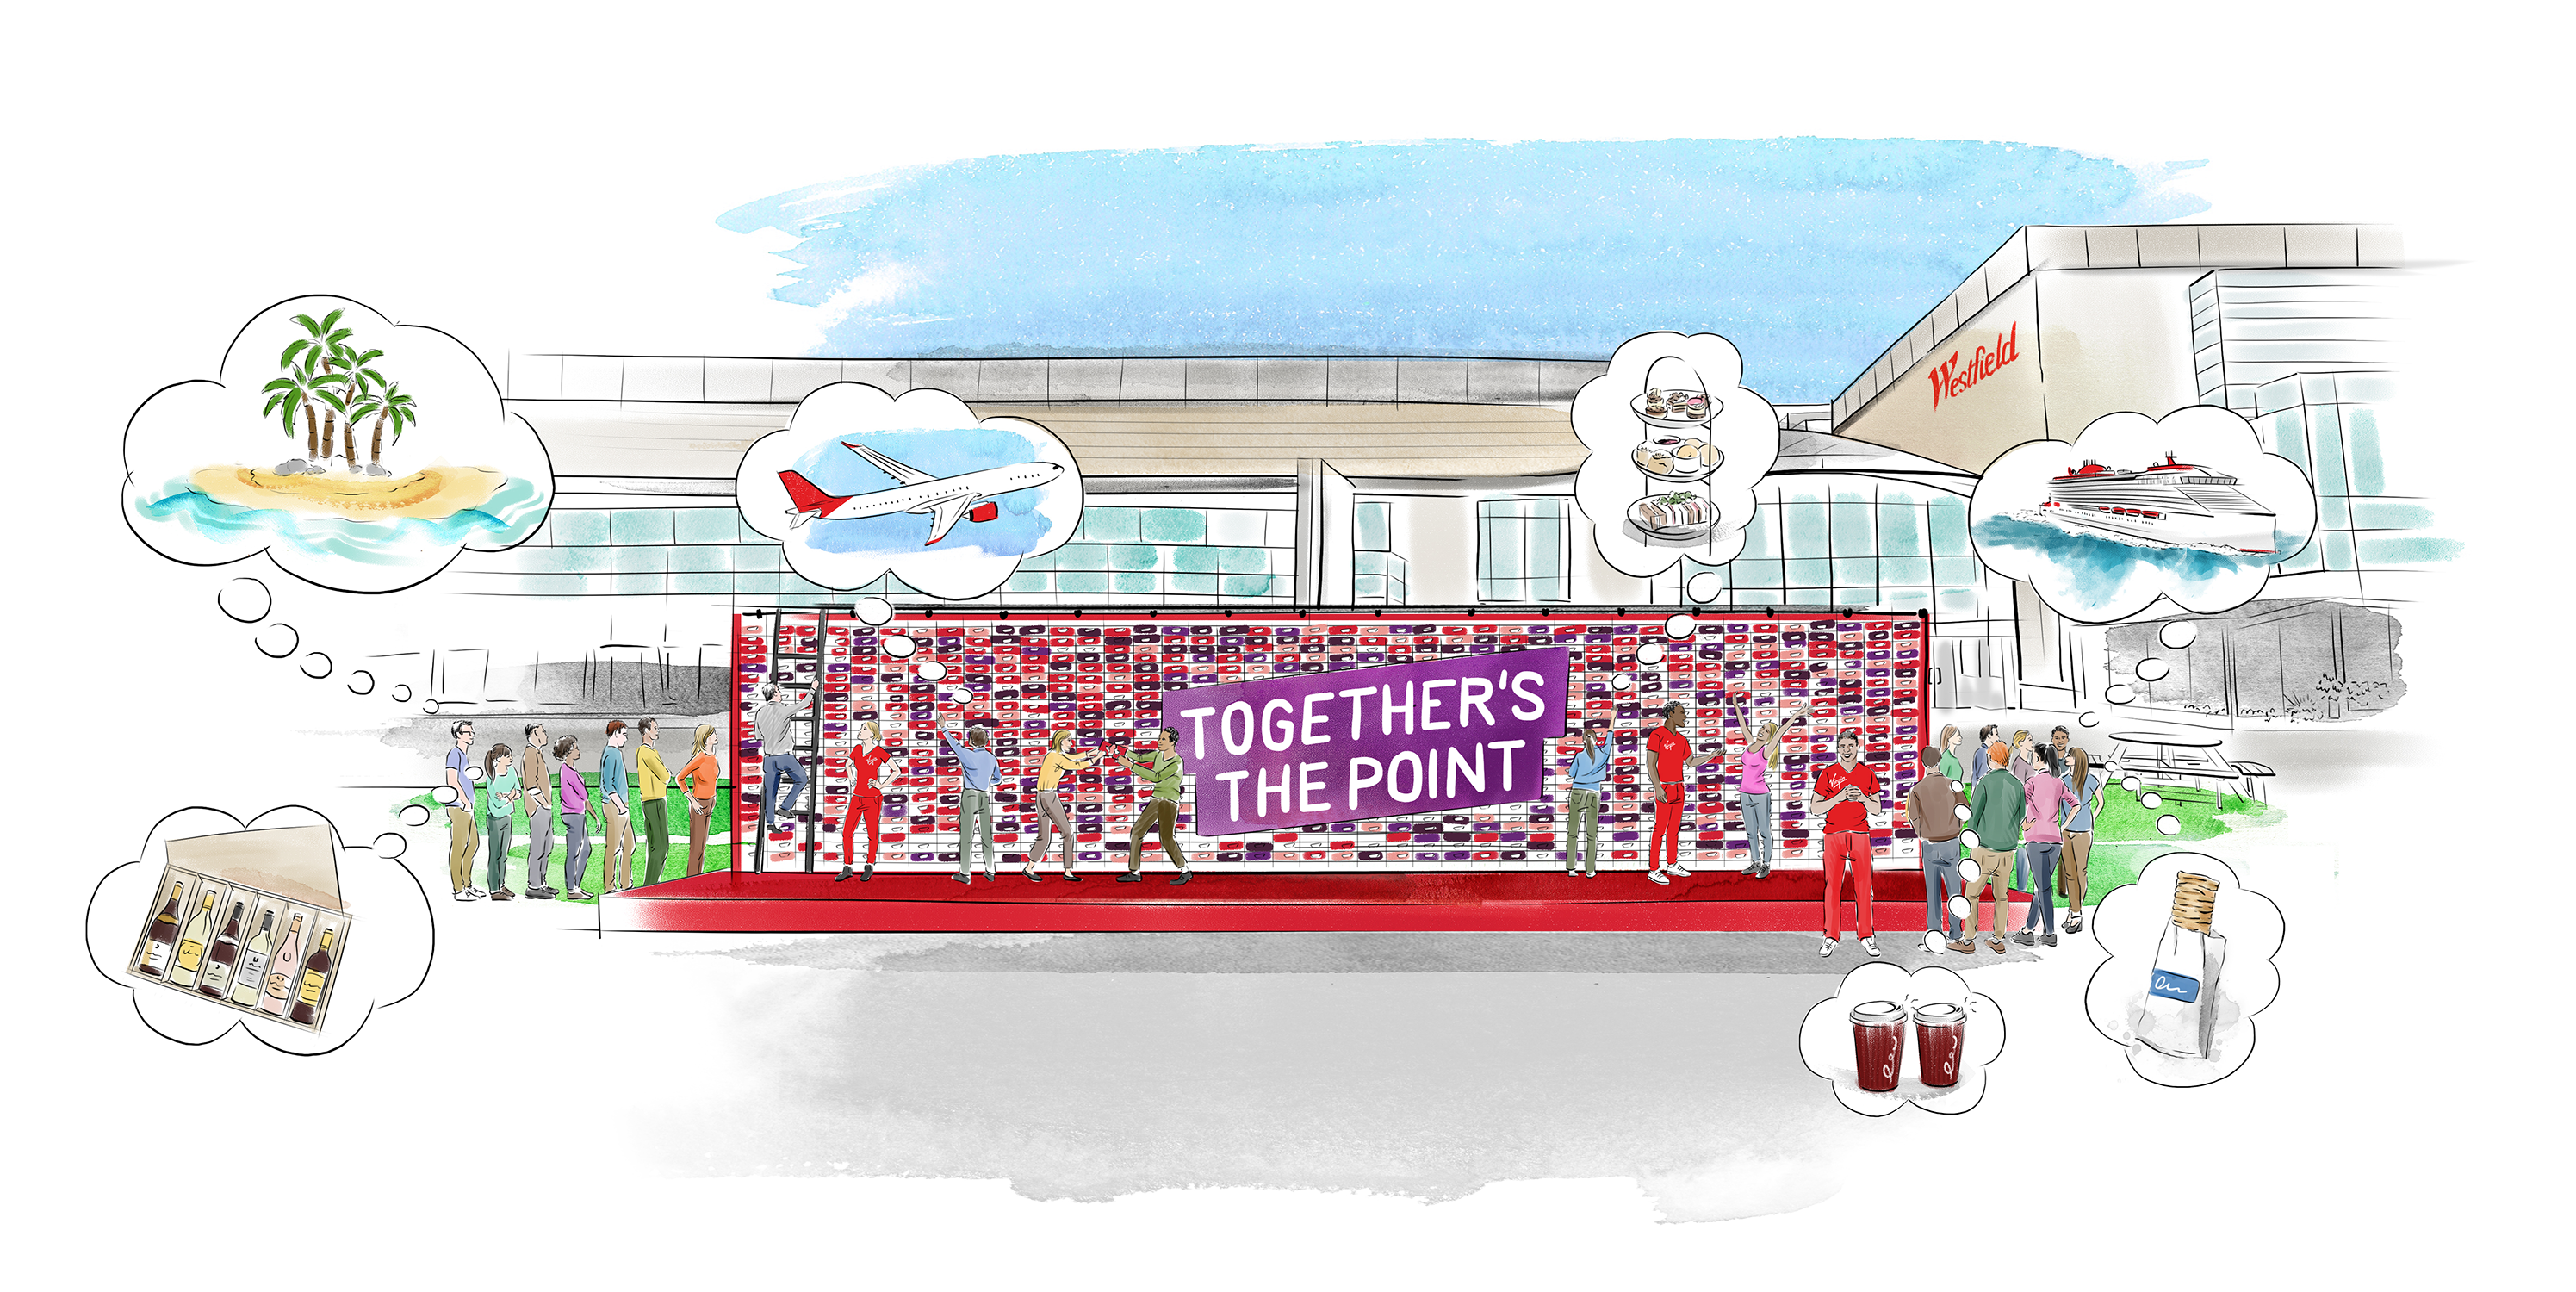 An illustrated image of the Virgin Red Points Board in Westfield White City